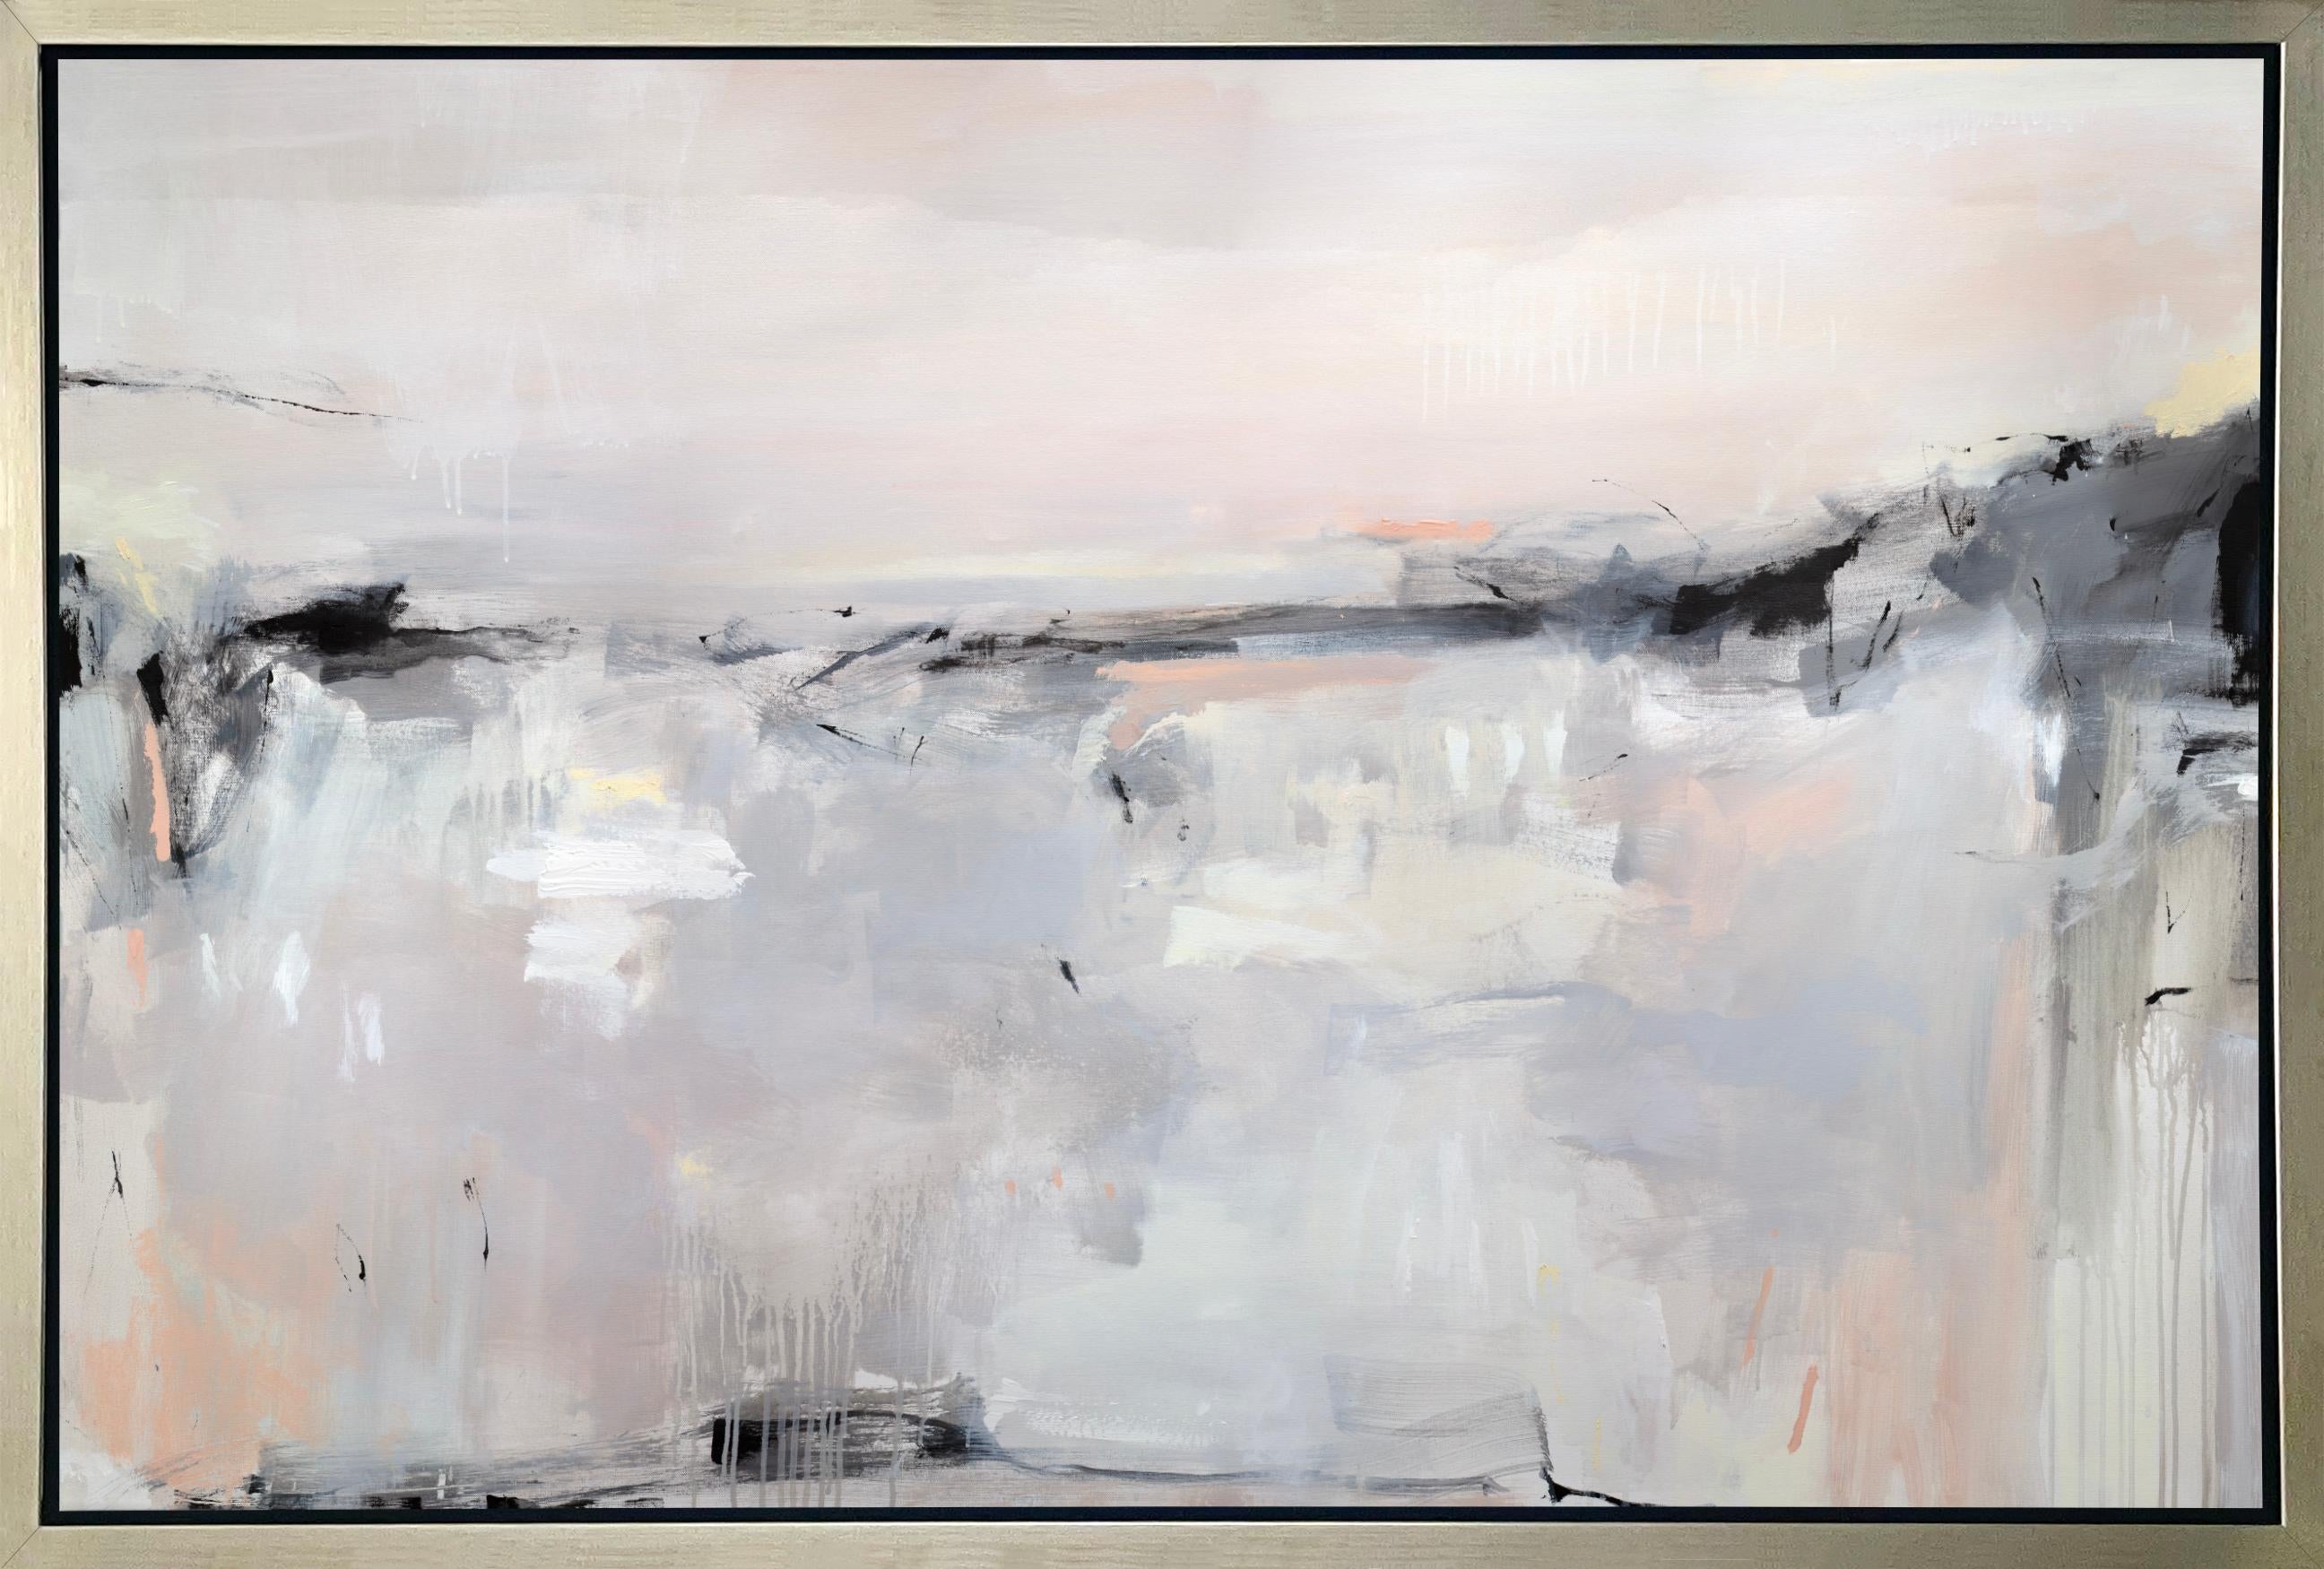 Kelly Rossetti Abstract Print - "Forever Roaming, " Framed Limited Edition Giclee Print, 30" x 45"